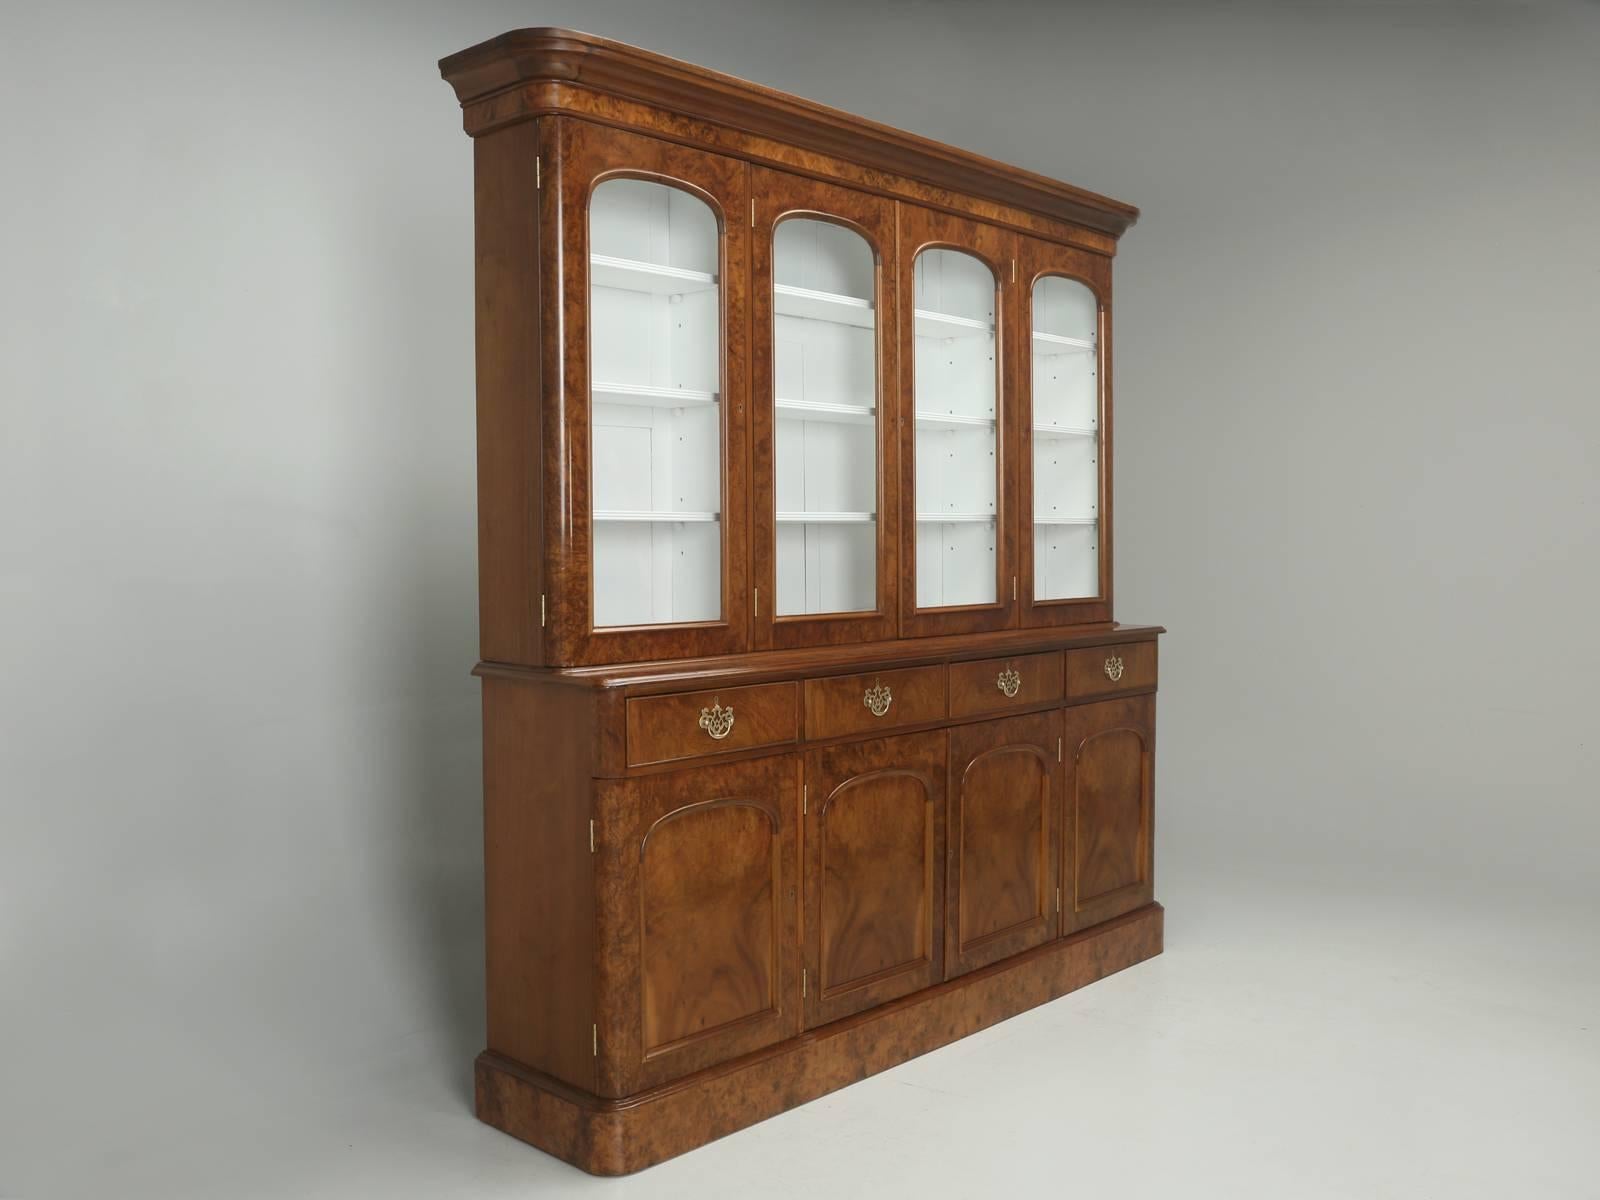 We located this late 1800’s, exquisite antique English “Burl Walnut and Birds-Eye Maple” bookcase, or bibliotheque, if you prefer, in a small village in Southwestern France. Each piece of burl walnut veneer was carefully book-matched when installed